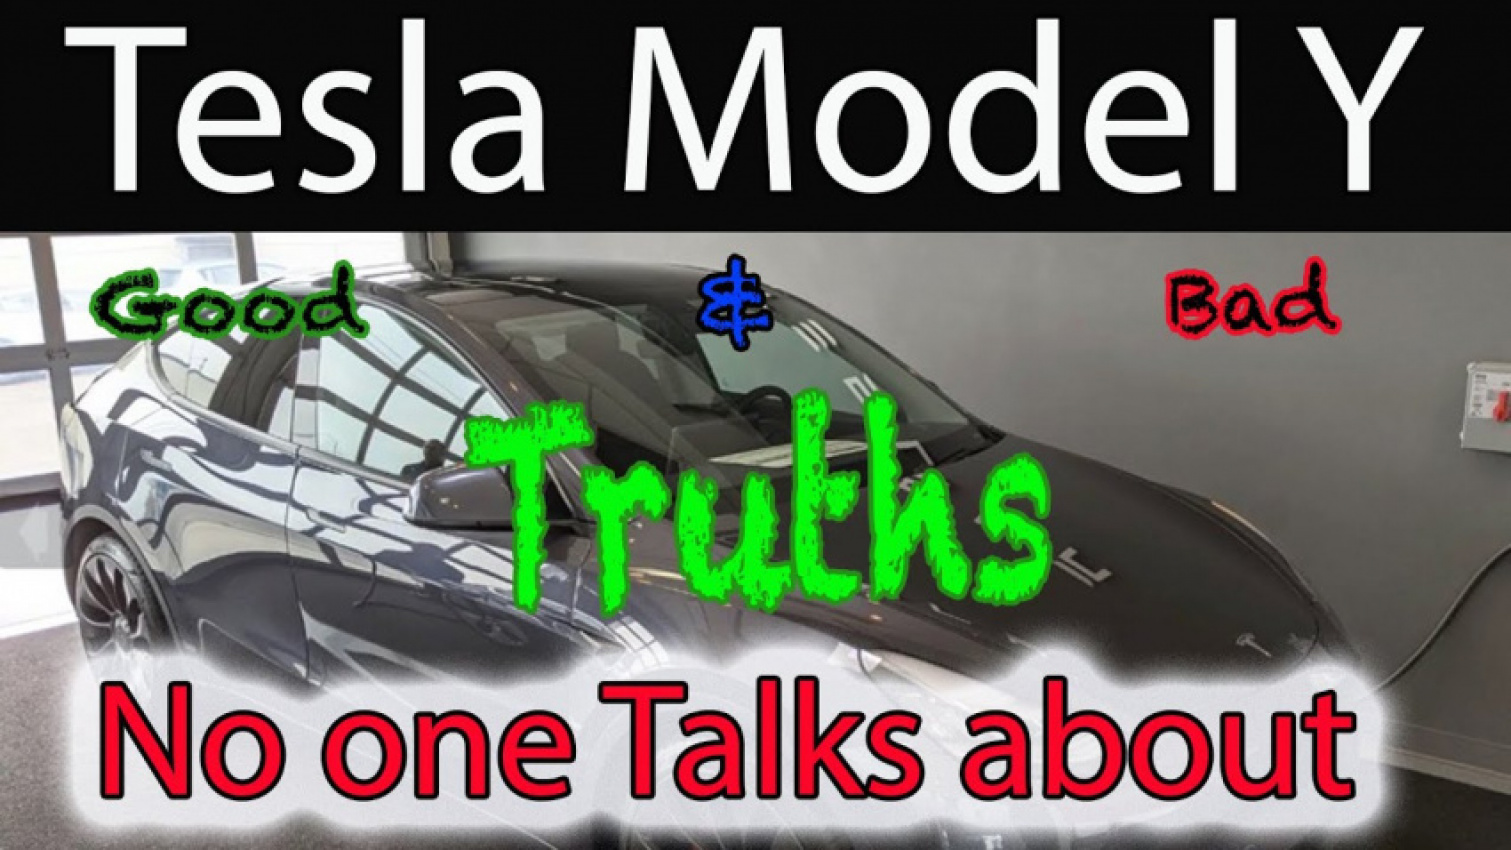 autos, cars, tesla, cost of owning a tesla, elon musk, elon musk interview, model 3 cost of ownership comparison, model 3 long range, model y, model y 2021, model y 7 seats, model y accessories, model y interior, model y performance, model y standard range, model y tesla, model y vs model 3, tall tesla guy, tesla autopilot, tesla model 3, tesla model 3 cost, tesla model y, tesla model y 2021, tesla model y interior, tesla model y long range, tesla model y review, tesla model y review 2021, tesla review 2021, owning a tesla model y – truth no one wants to talk about